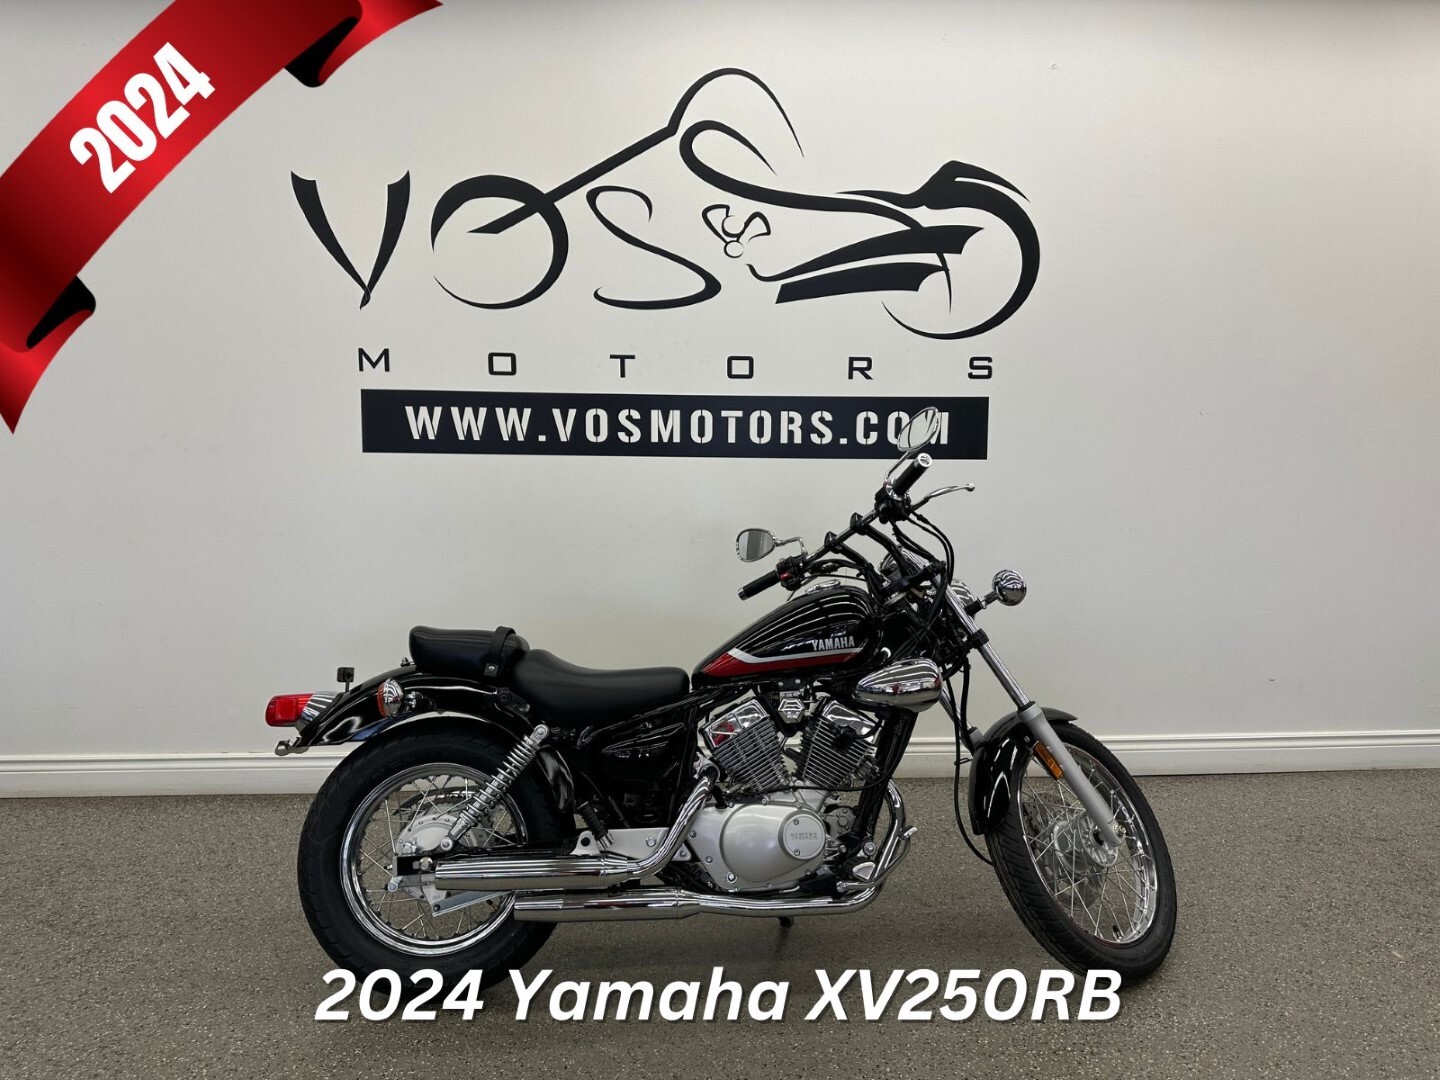 2024 Yamaha XV250RB XV250RB - V6012 - -No Payments for 1 Year**